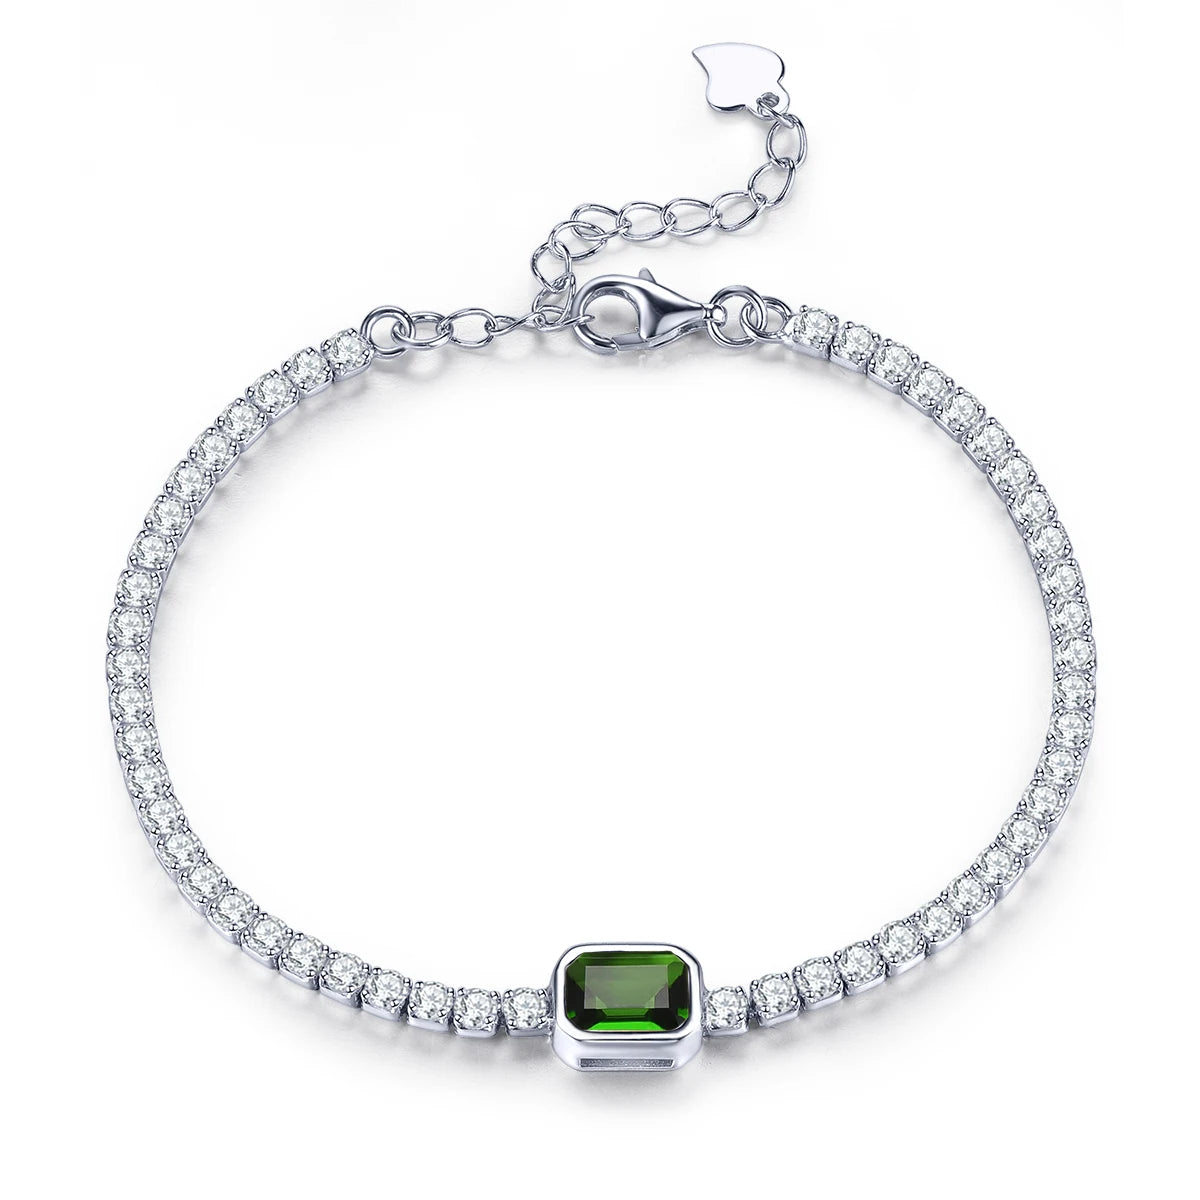 Natural Peridot Sterling Silver Bracelet S925 Jewelry 1.23 Carats Genuine Colorful Gemstone Classic Simple Style Top Quality Natural Diopside 20cm